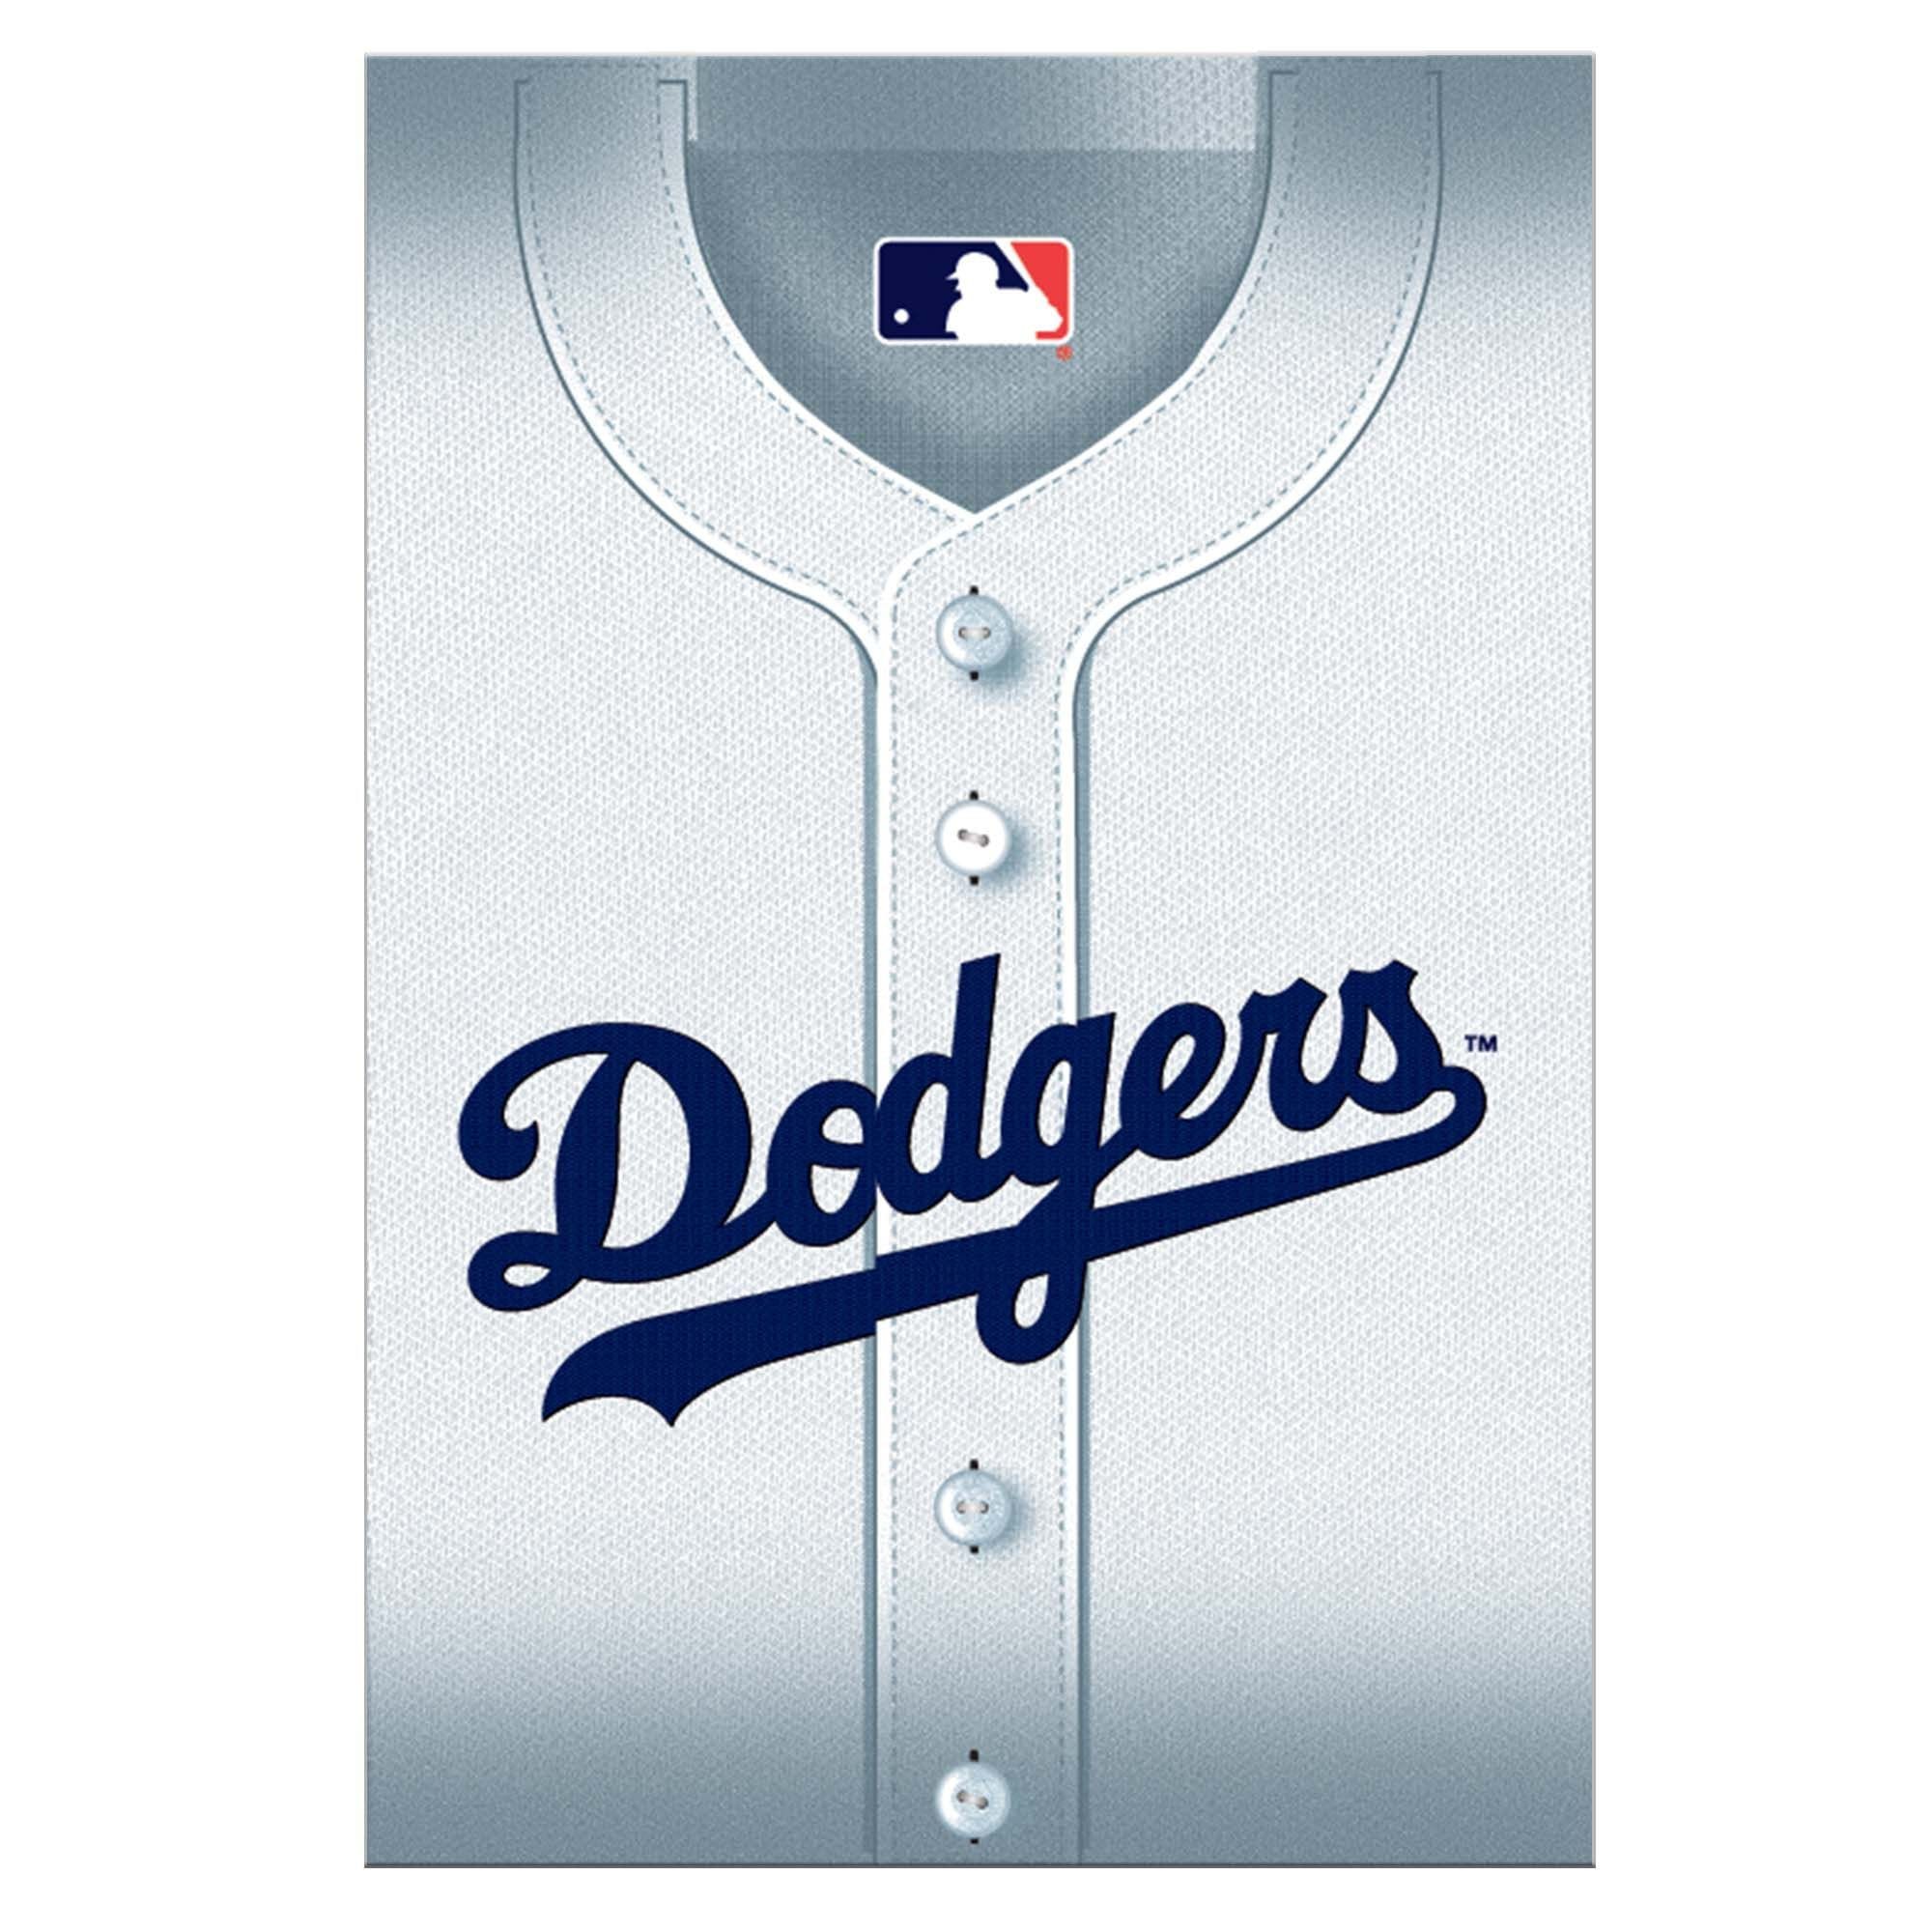 Get ready for July 4 with Los Angeles Dodgers gear